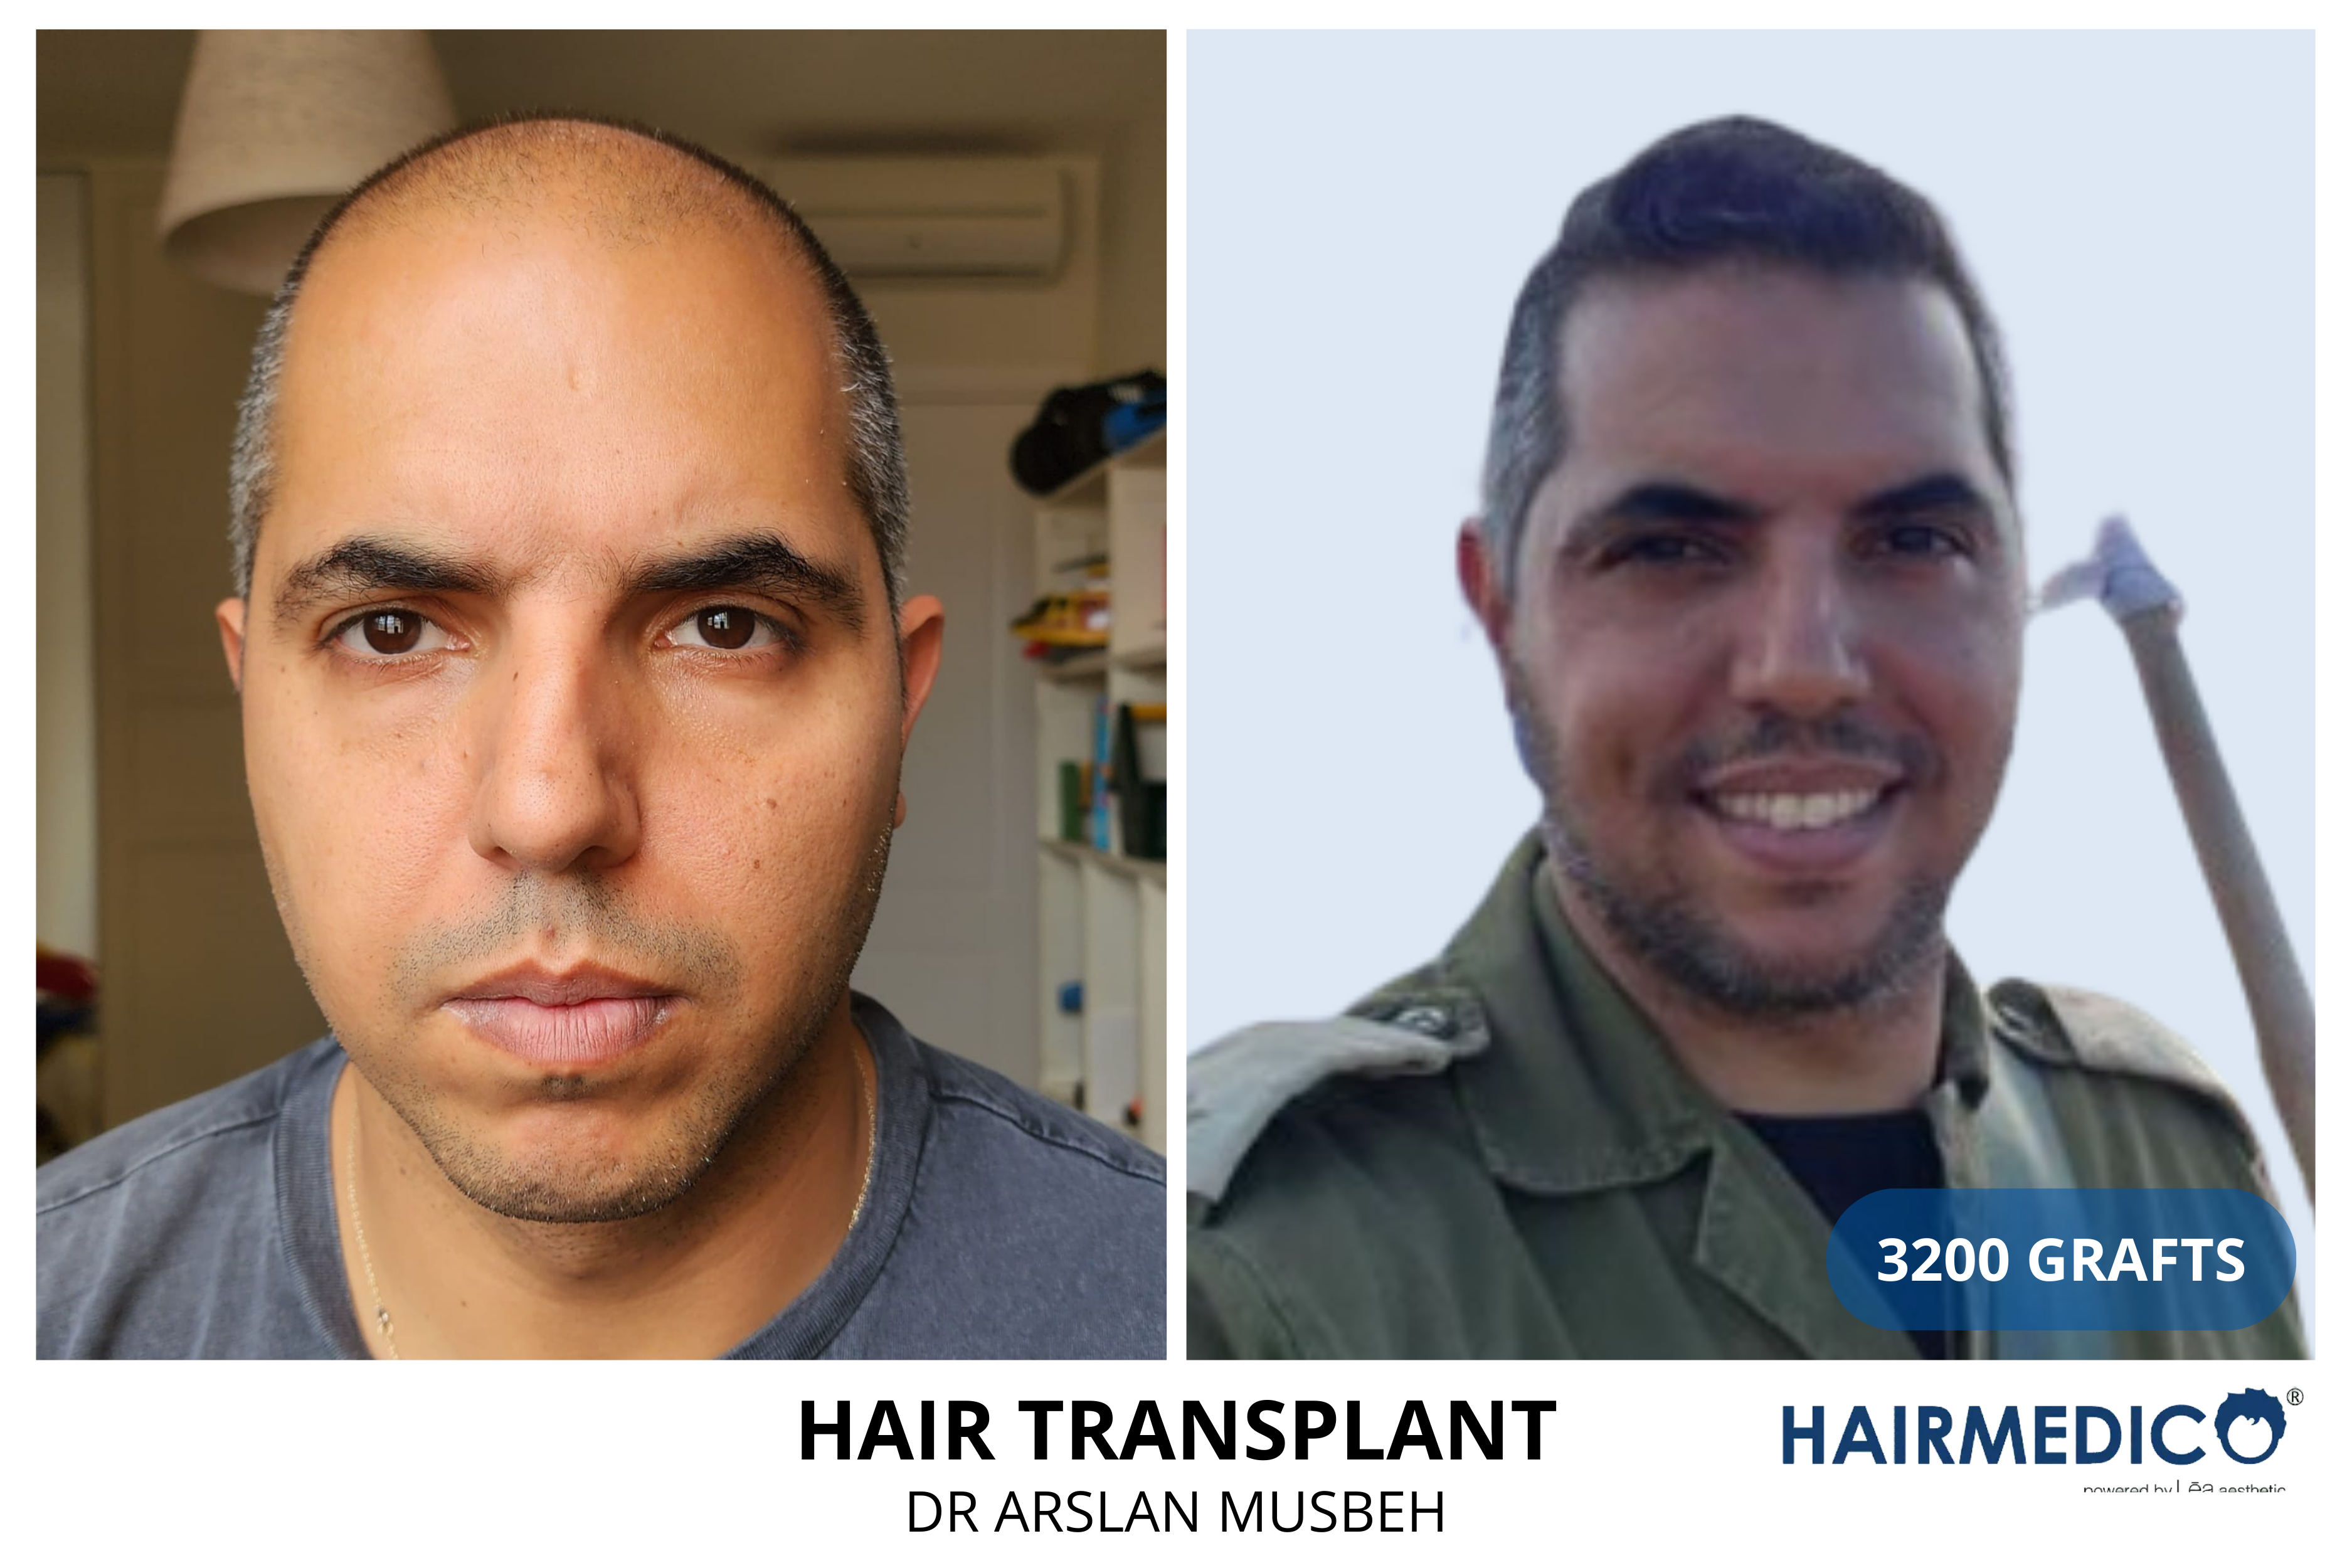 Afro women  hair transplant,before and after hair transplant